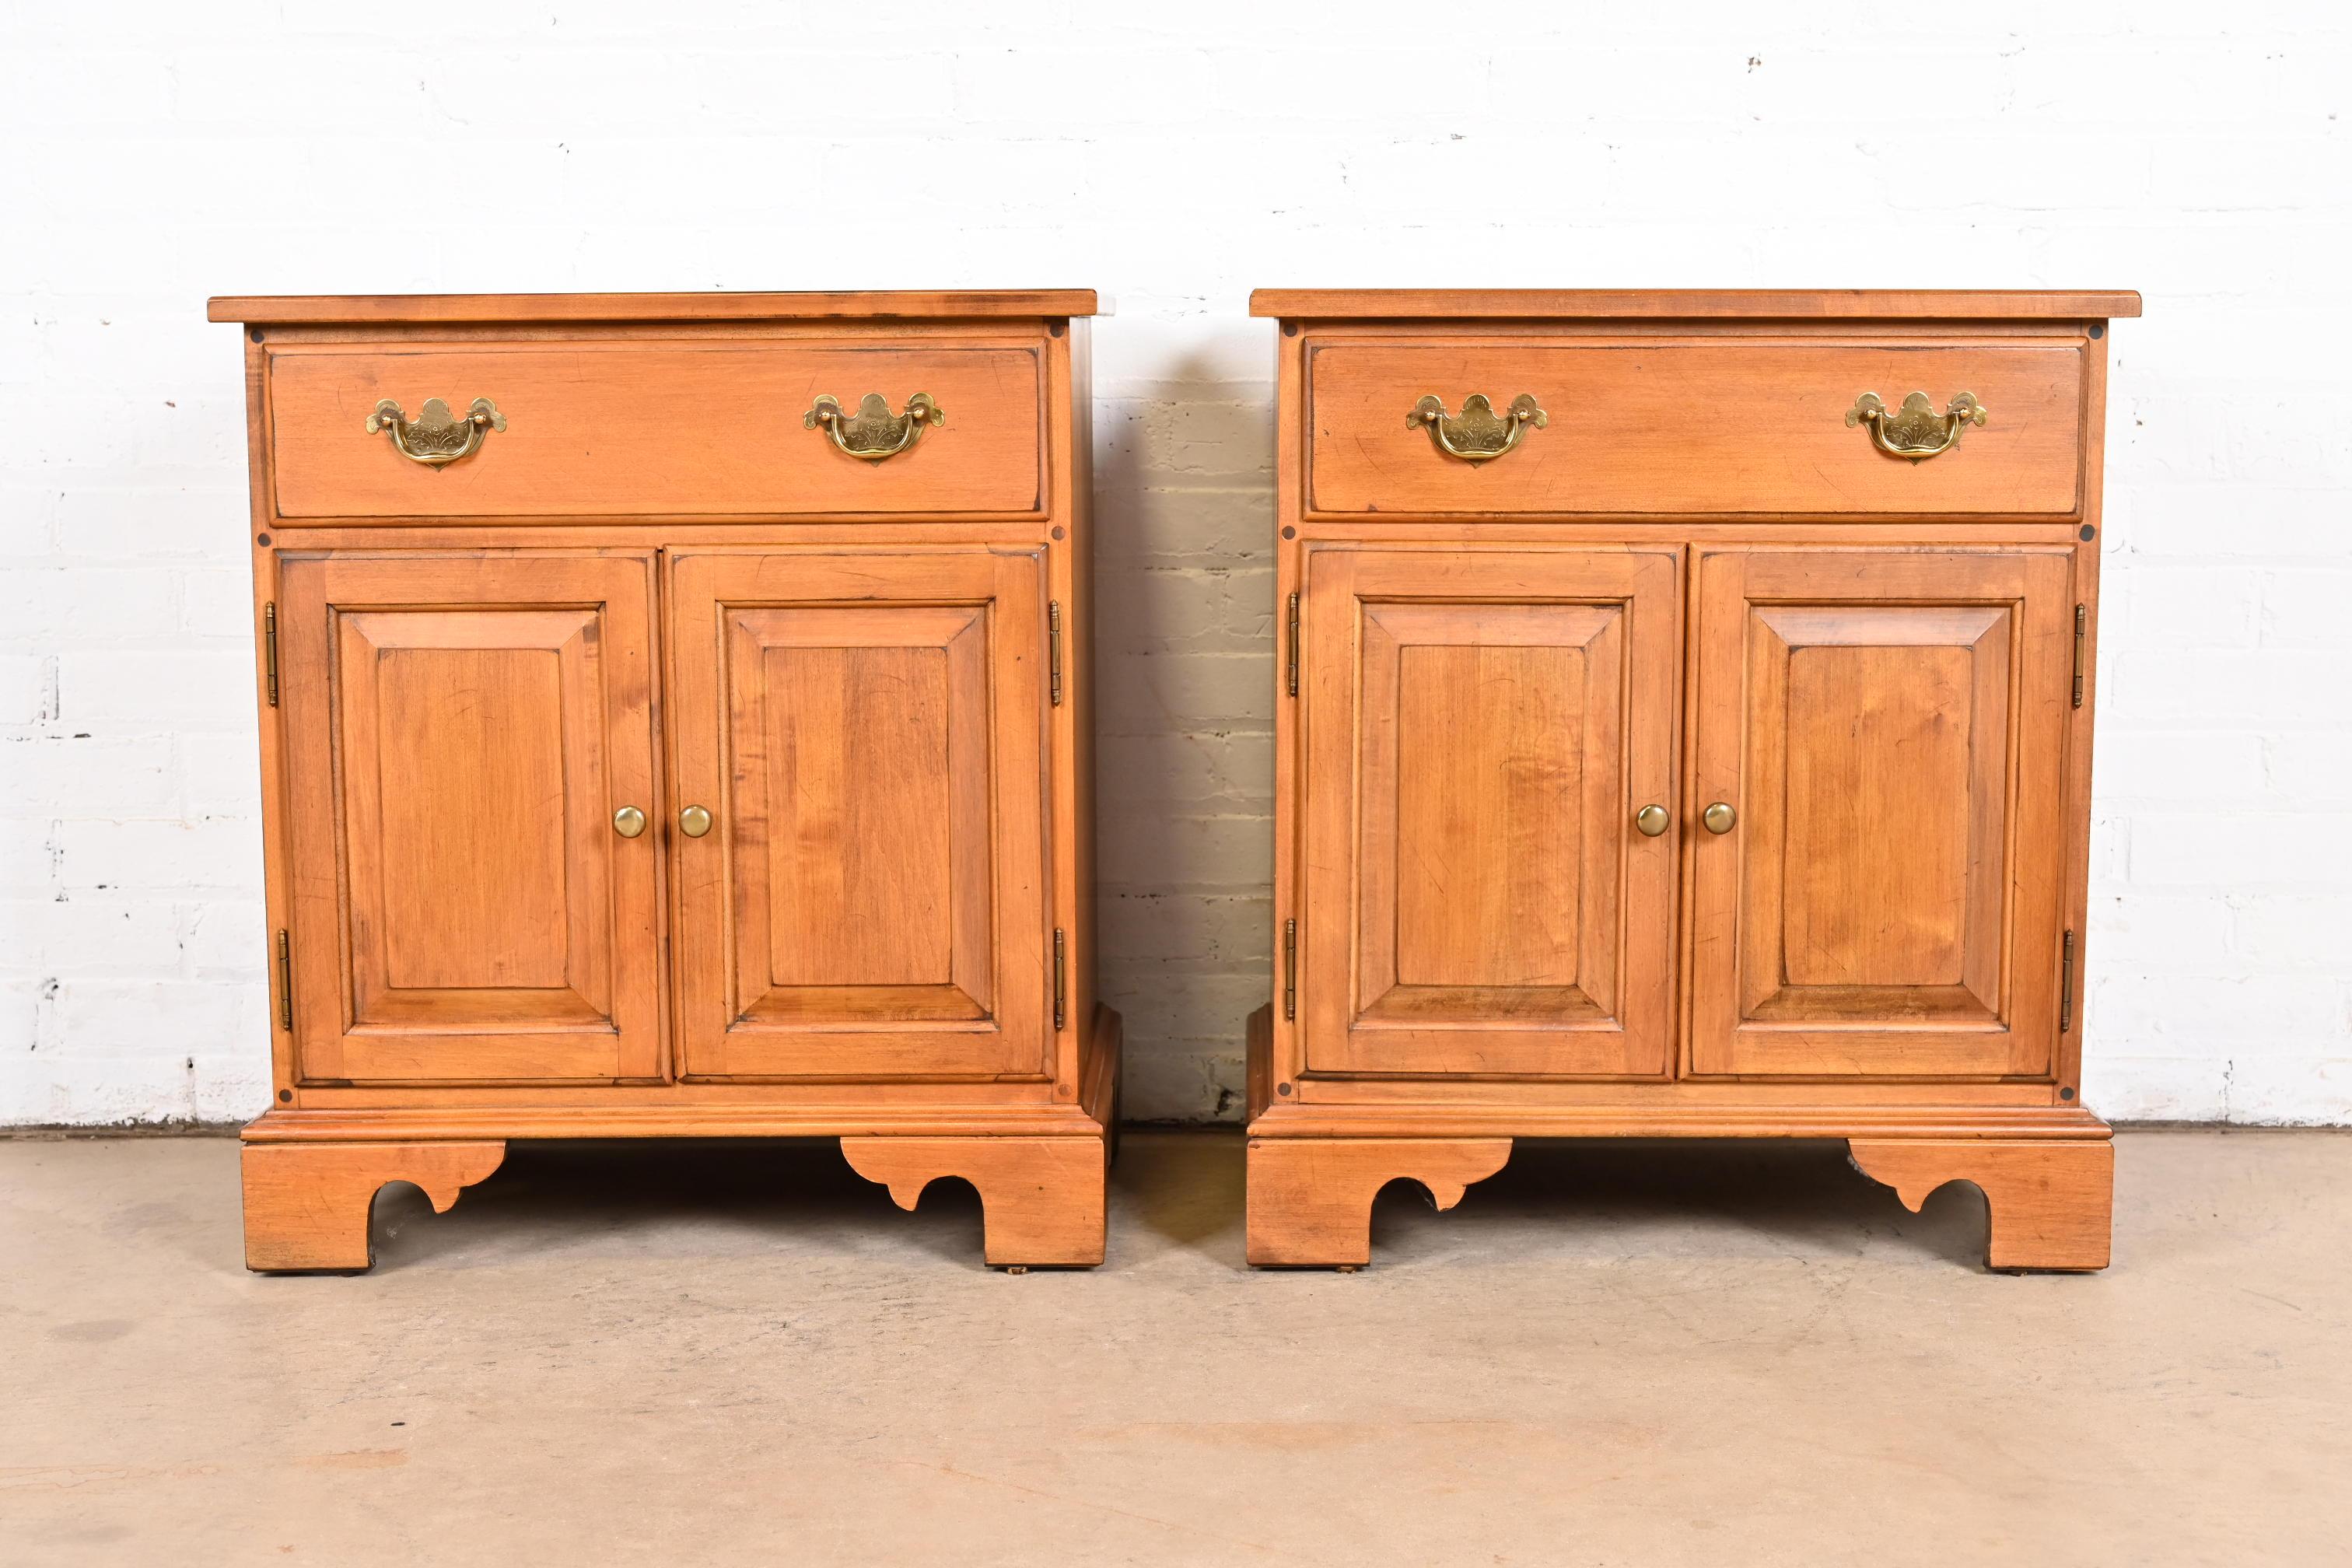 A gorgeous pair of American Colonial or Georgian style nightstands or bedside chests

USA, Circa 1990s

Solid maple, with original brass hardware.

Measures: 24